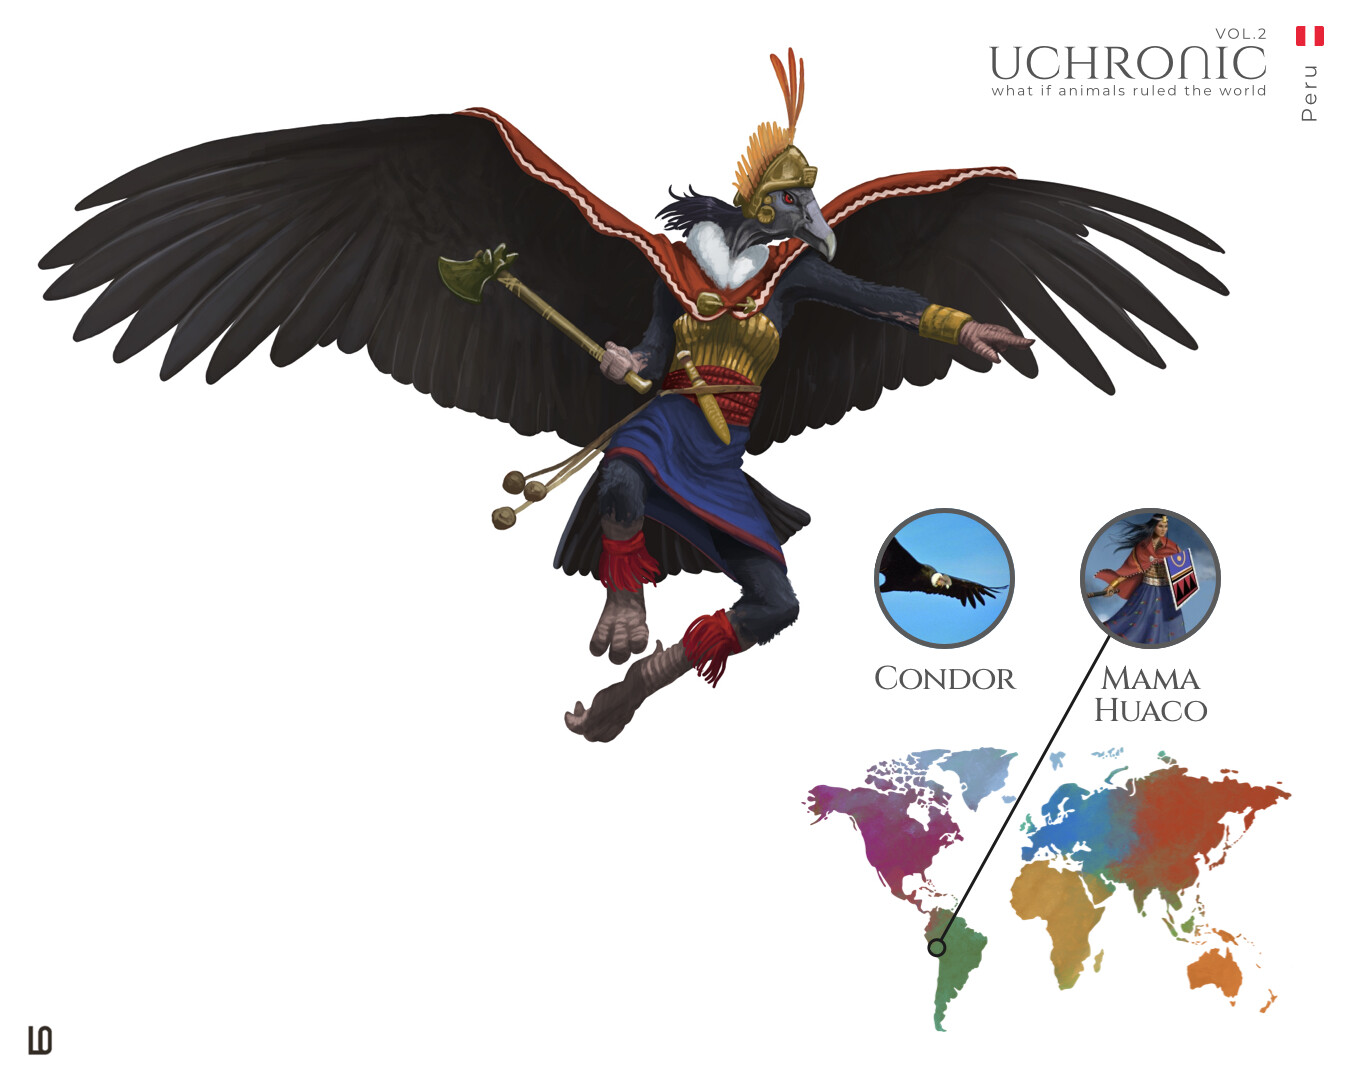 Mama Huaco, the legendary woman linked with the myth of the origin of the Incas, depicted as a andean condor… history…legend…ages from then, who knows…